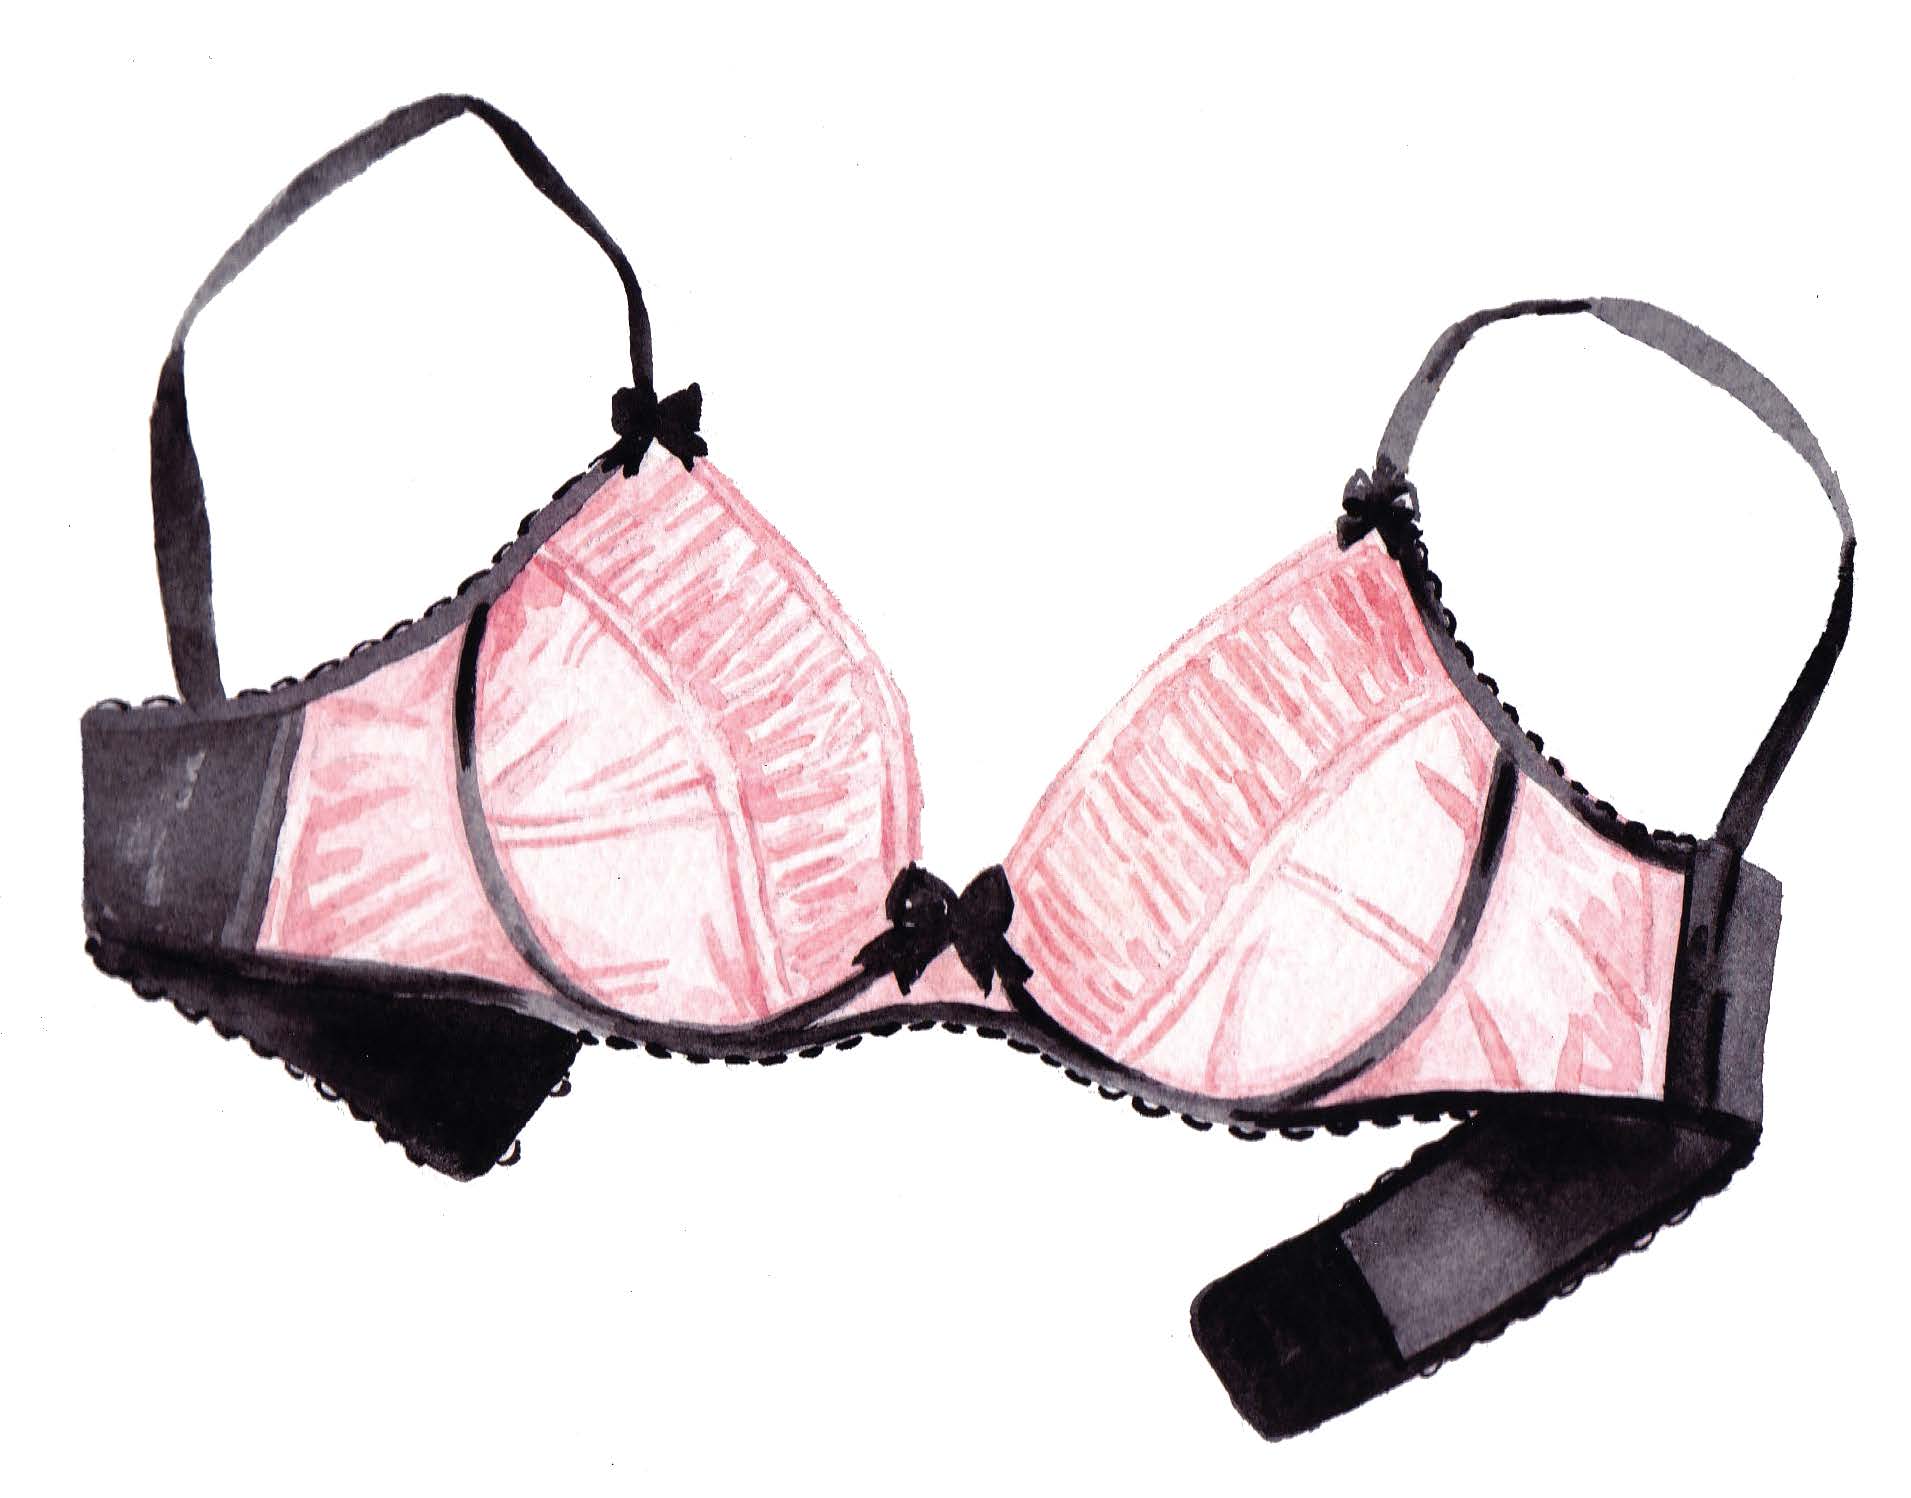 A watercolor illustration of a pink and black bra with bow accents that may be worn as wedding lingerie